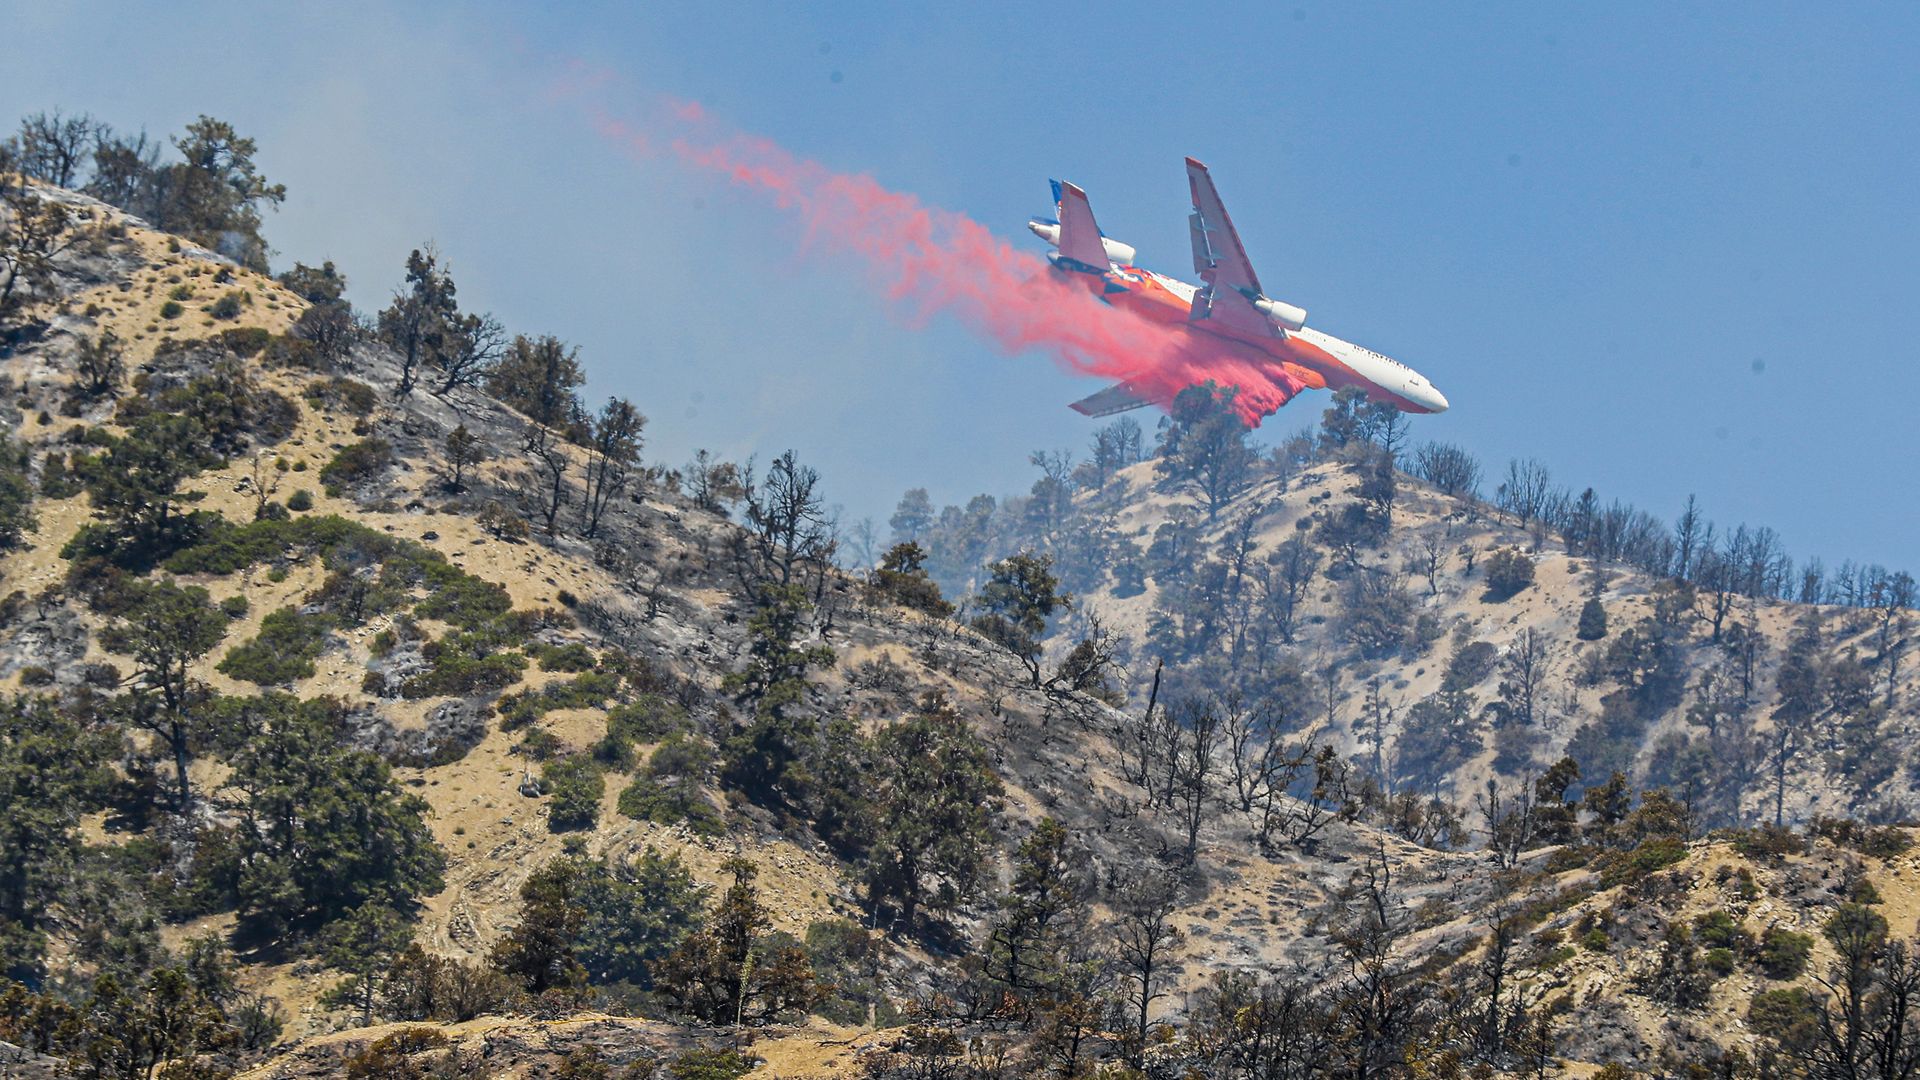 A 10 Tanker DC-10 jet delivers fire retardant as crews continue to battle the Sheep Fire on Monday.